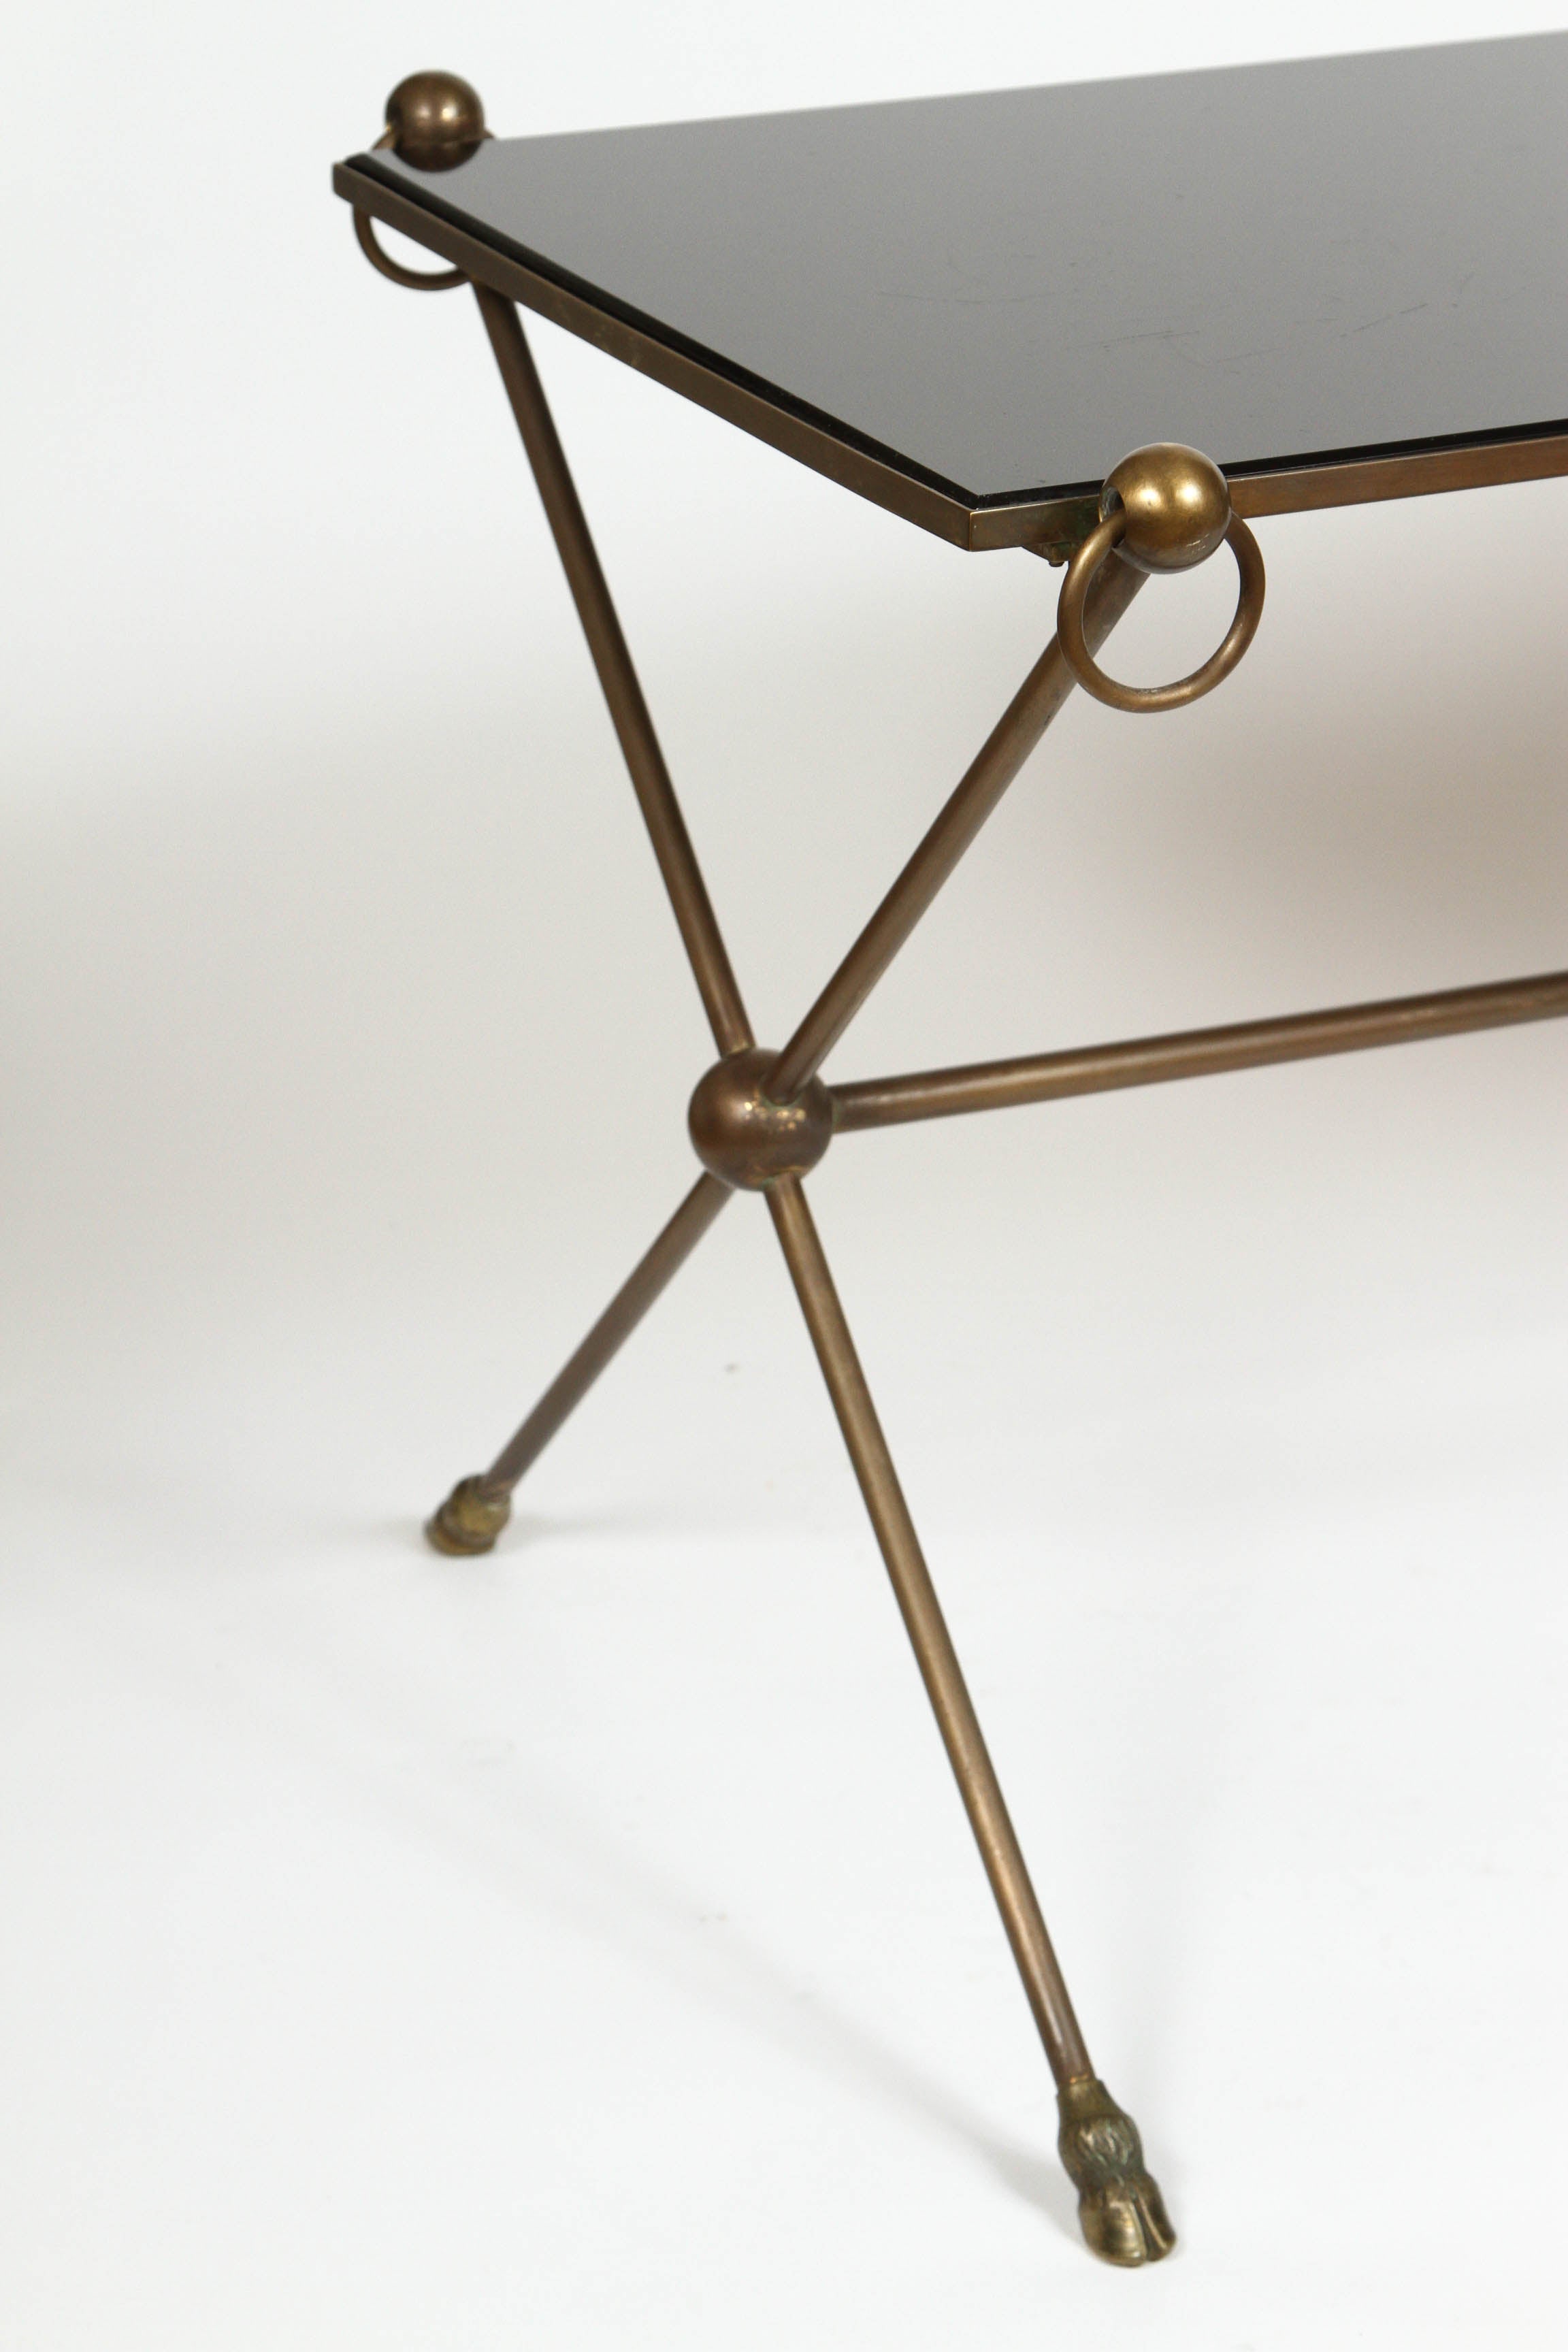 Vintage Maison Baguès brass cocktail table with black opaline glass top resting on an X-base. Features bronze and brass stressed rings and spheres at the corners, legs stand on hooves. Made in France, circa 1950.